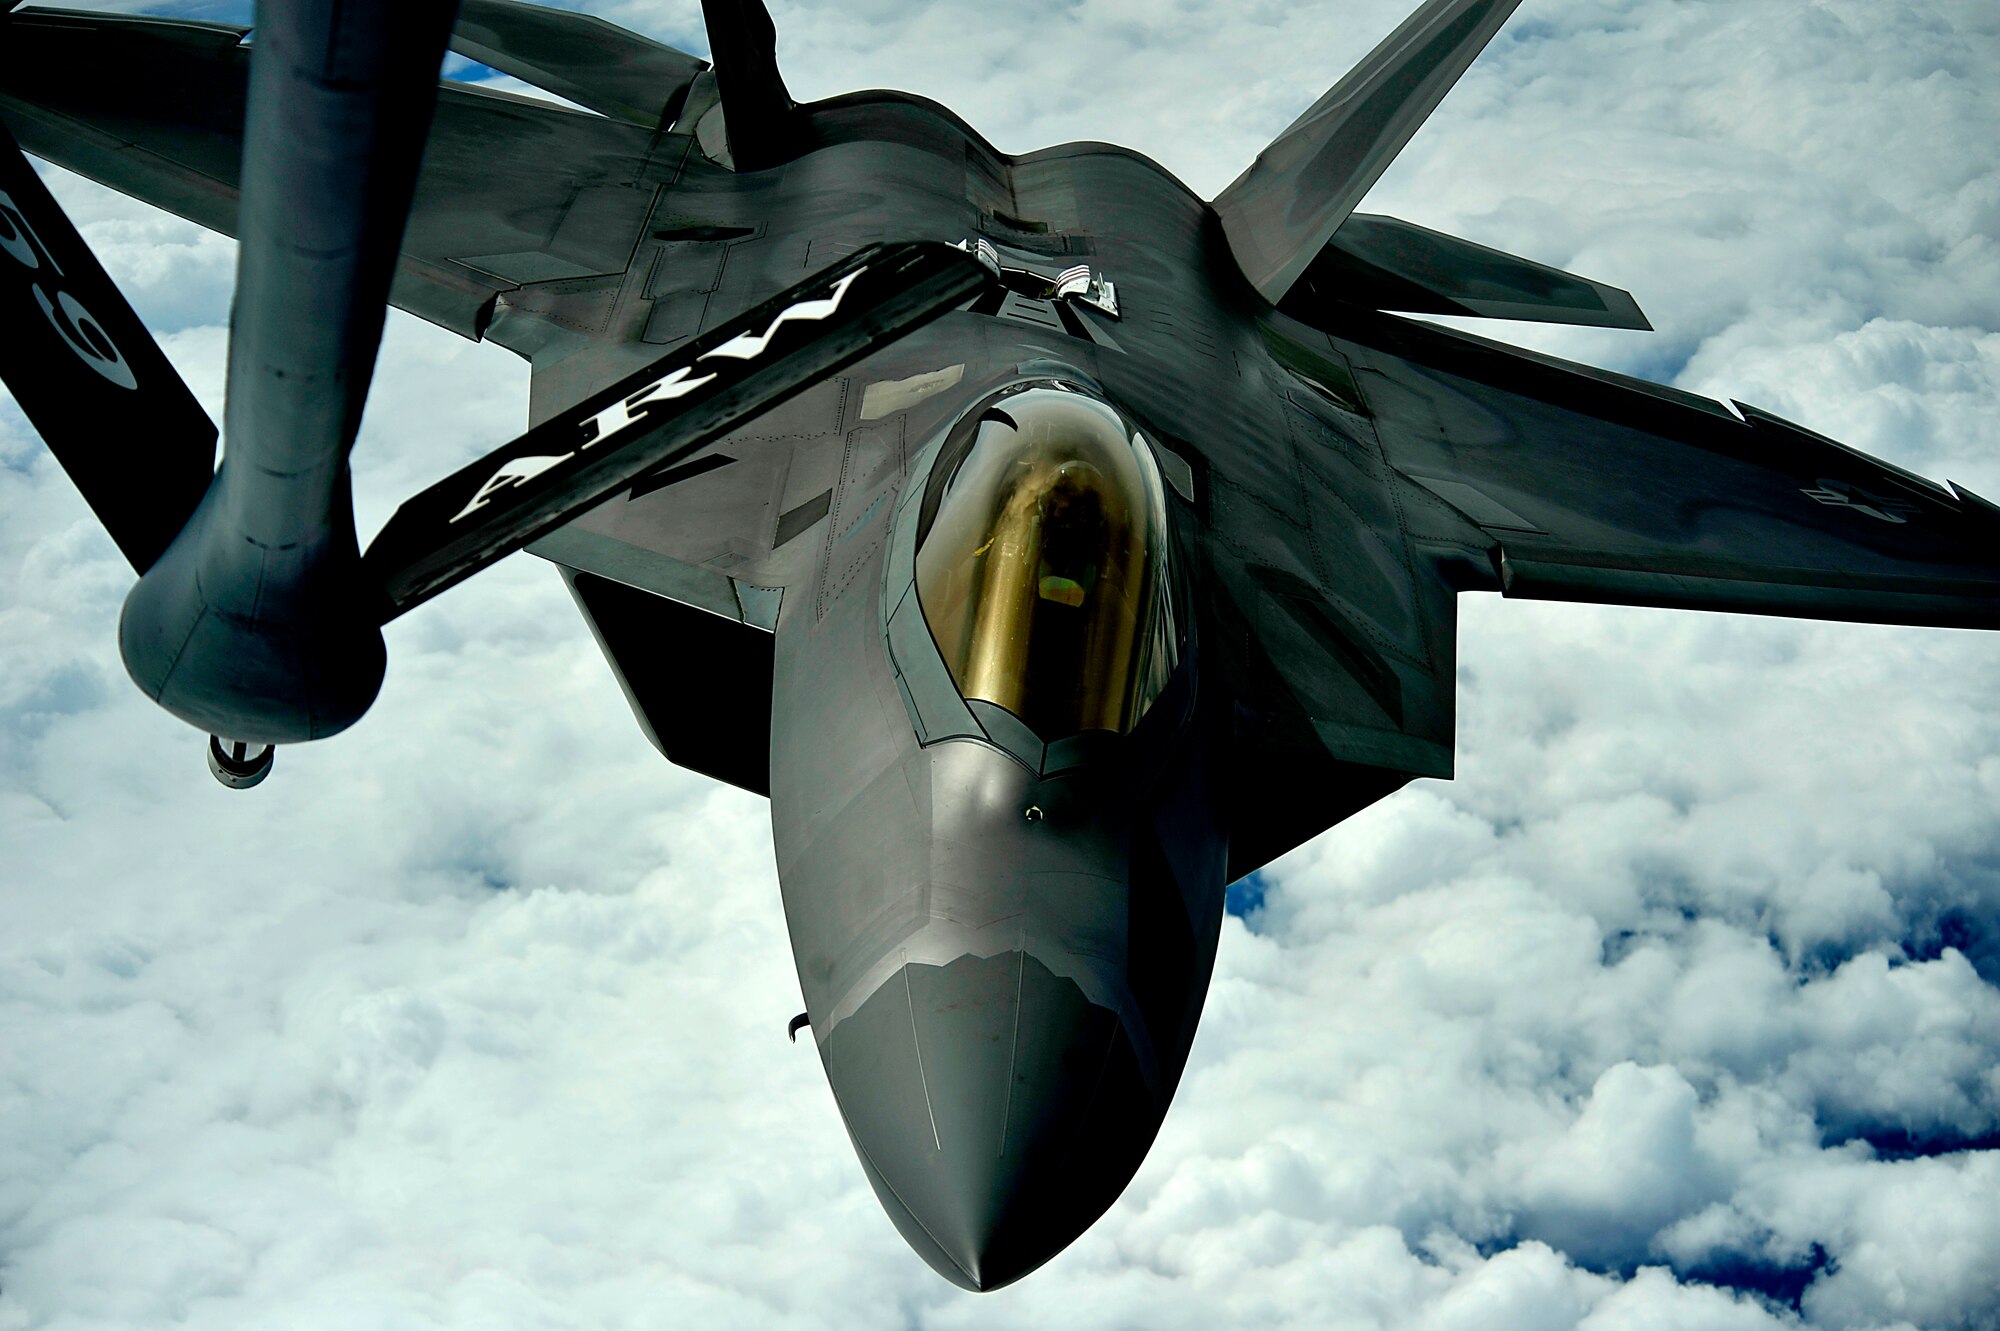 A 1st Fighter Wing's F-22 Raptor from Joint Base Langley-Eustis, Va. pulls into position to accept fuel from a KC-135 Stratotanker with the 756th Air Refueling Squadron, Joint Base Andrews Naval Air Facility, Md. off the east coast on May 10, 2012. The first Raptor assigned to the Wing arrived Jan. 7, 2005. This aircraft was allocated as a trainer, and was docked in a hanger for maintenance personnel to familiarize themselves with its complex systems. The second Raptor, designated for flying operations, arrived Jan. 18, 2005. On Dec. 15, 2005, Air Combat Command commander, along with the 1 FW commander, announced the 27th Fighter Squadron as fully operational capable to fly, fight and win with the F-22. (U.S. Air Force Photo by: Master Sgt. Jeremy Lock) (Released)
